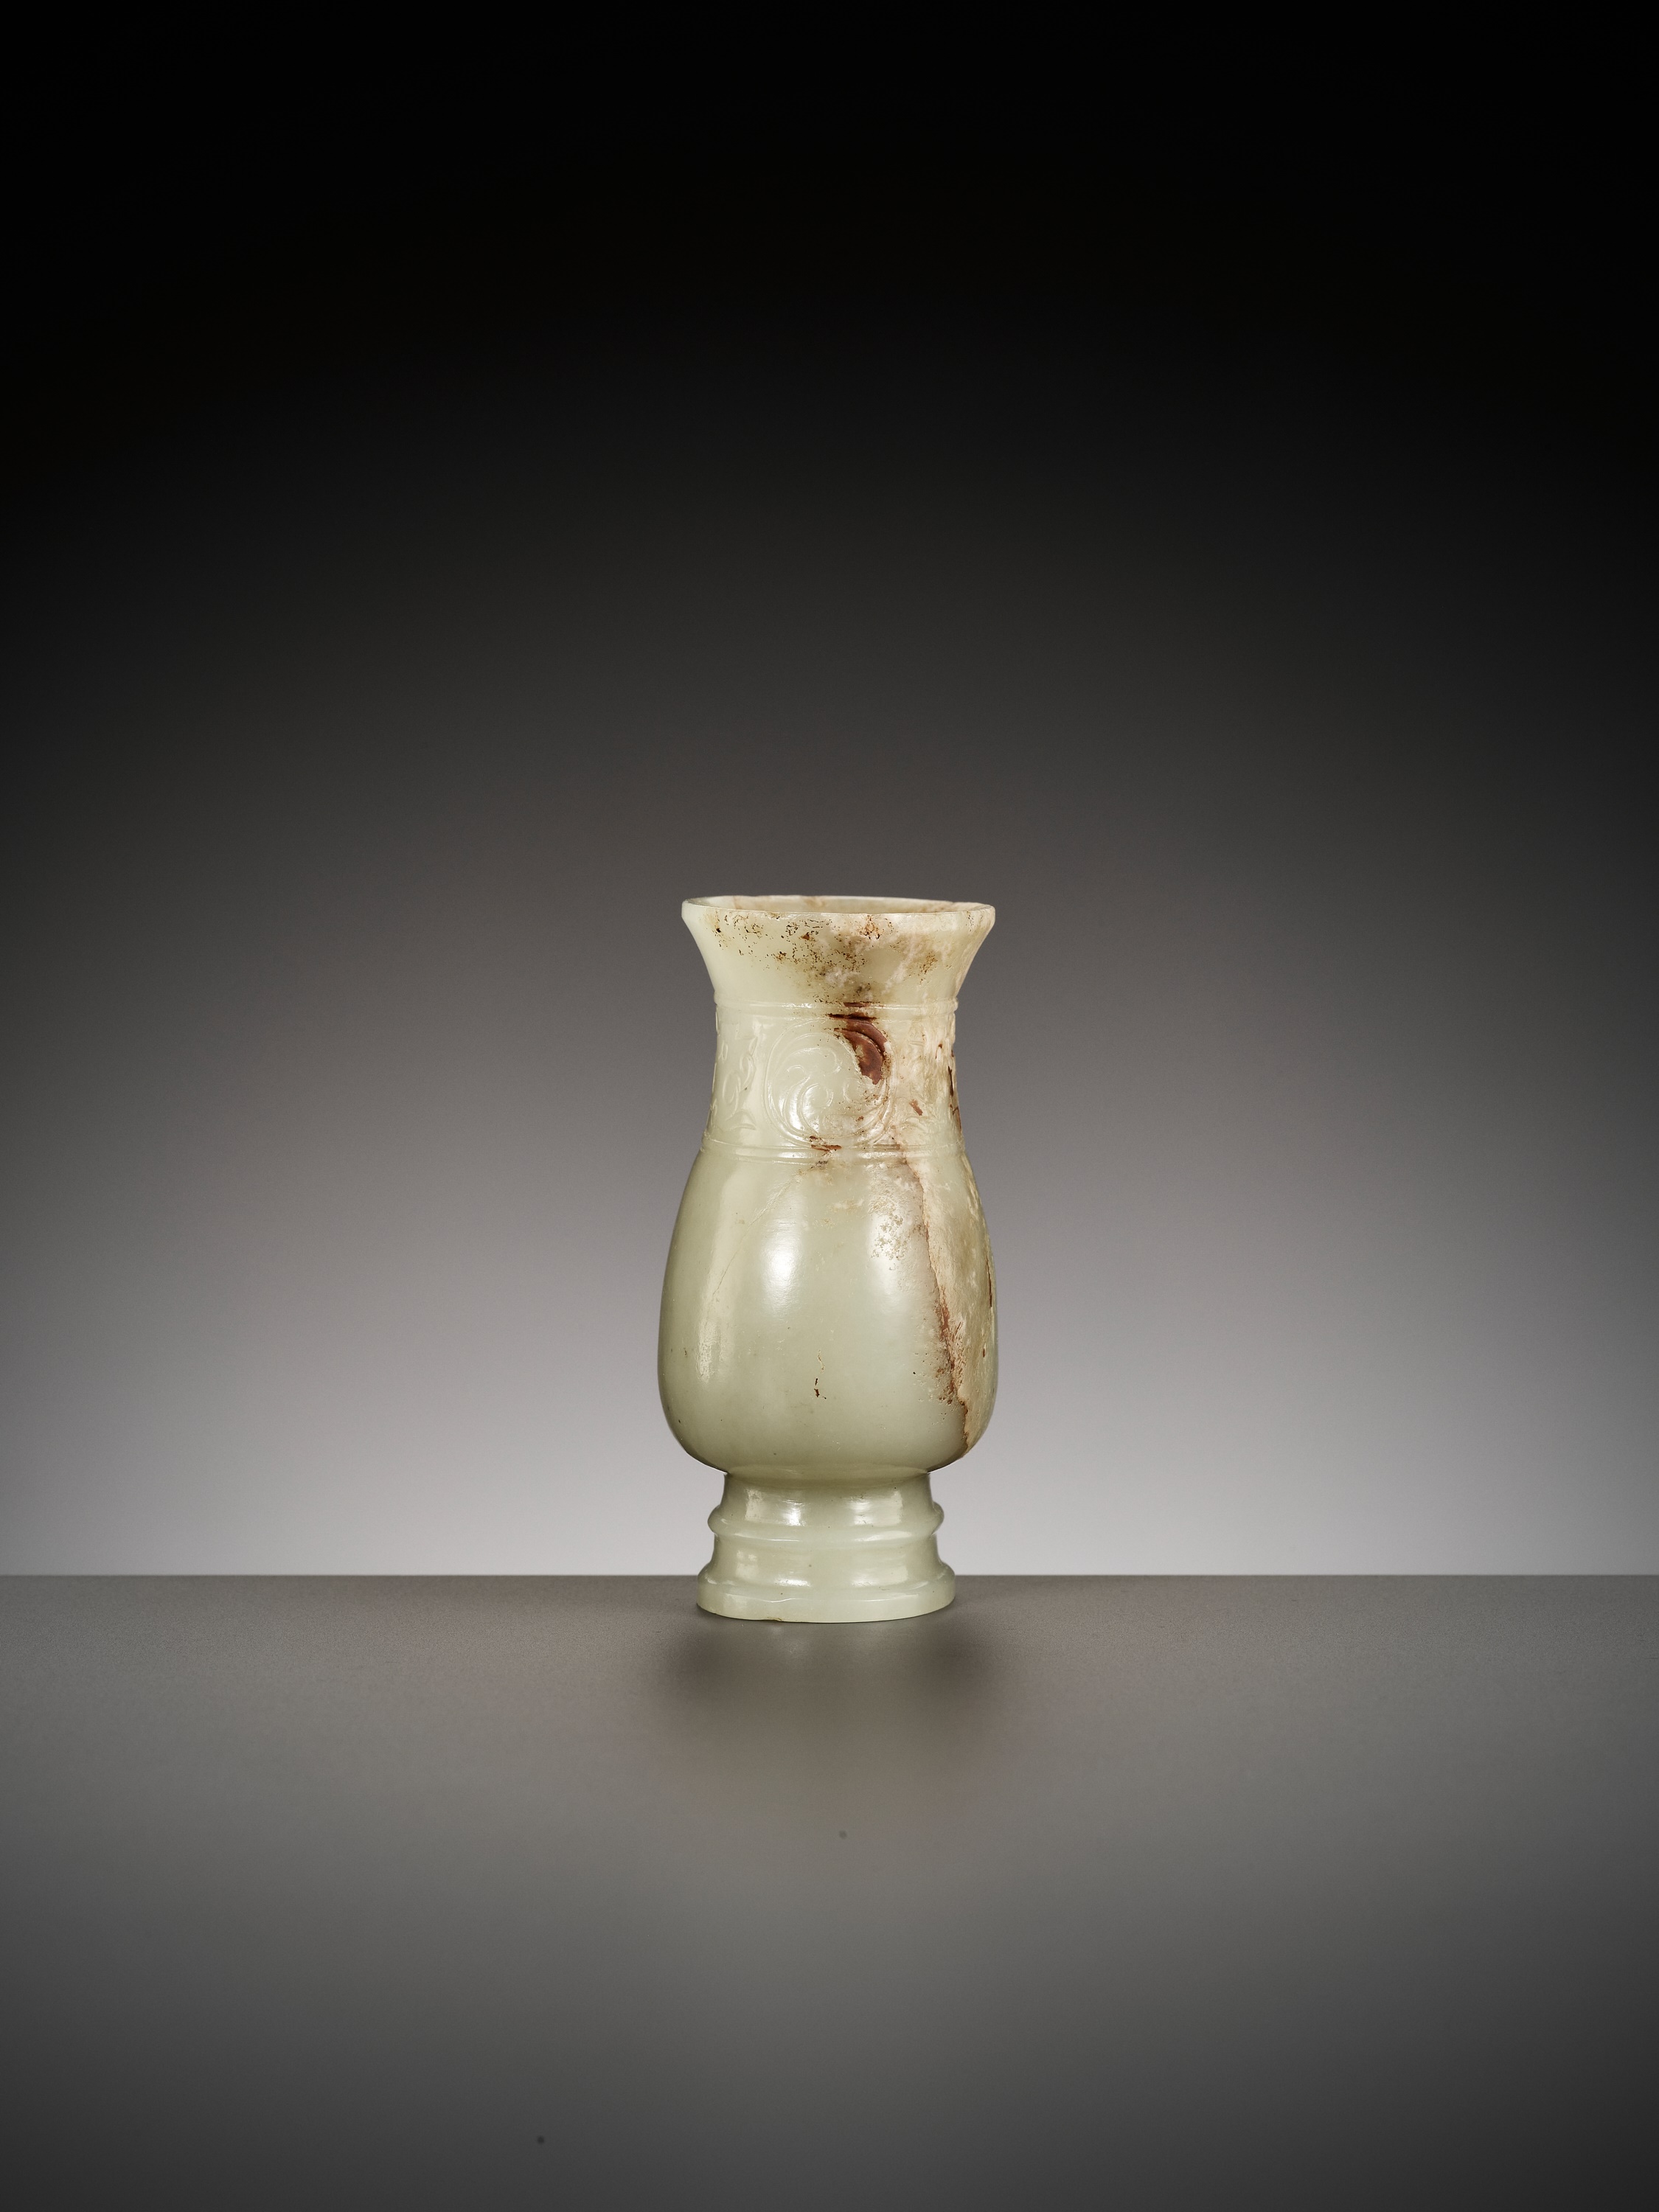 A RARE ARCHAISTIC 'SHANG BRONZE IMITATION' JADE VESSEL, ZHI, LATE SONG TO EARLY MING DYNASTY - Image 14 of 19